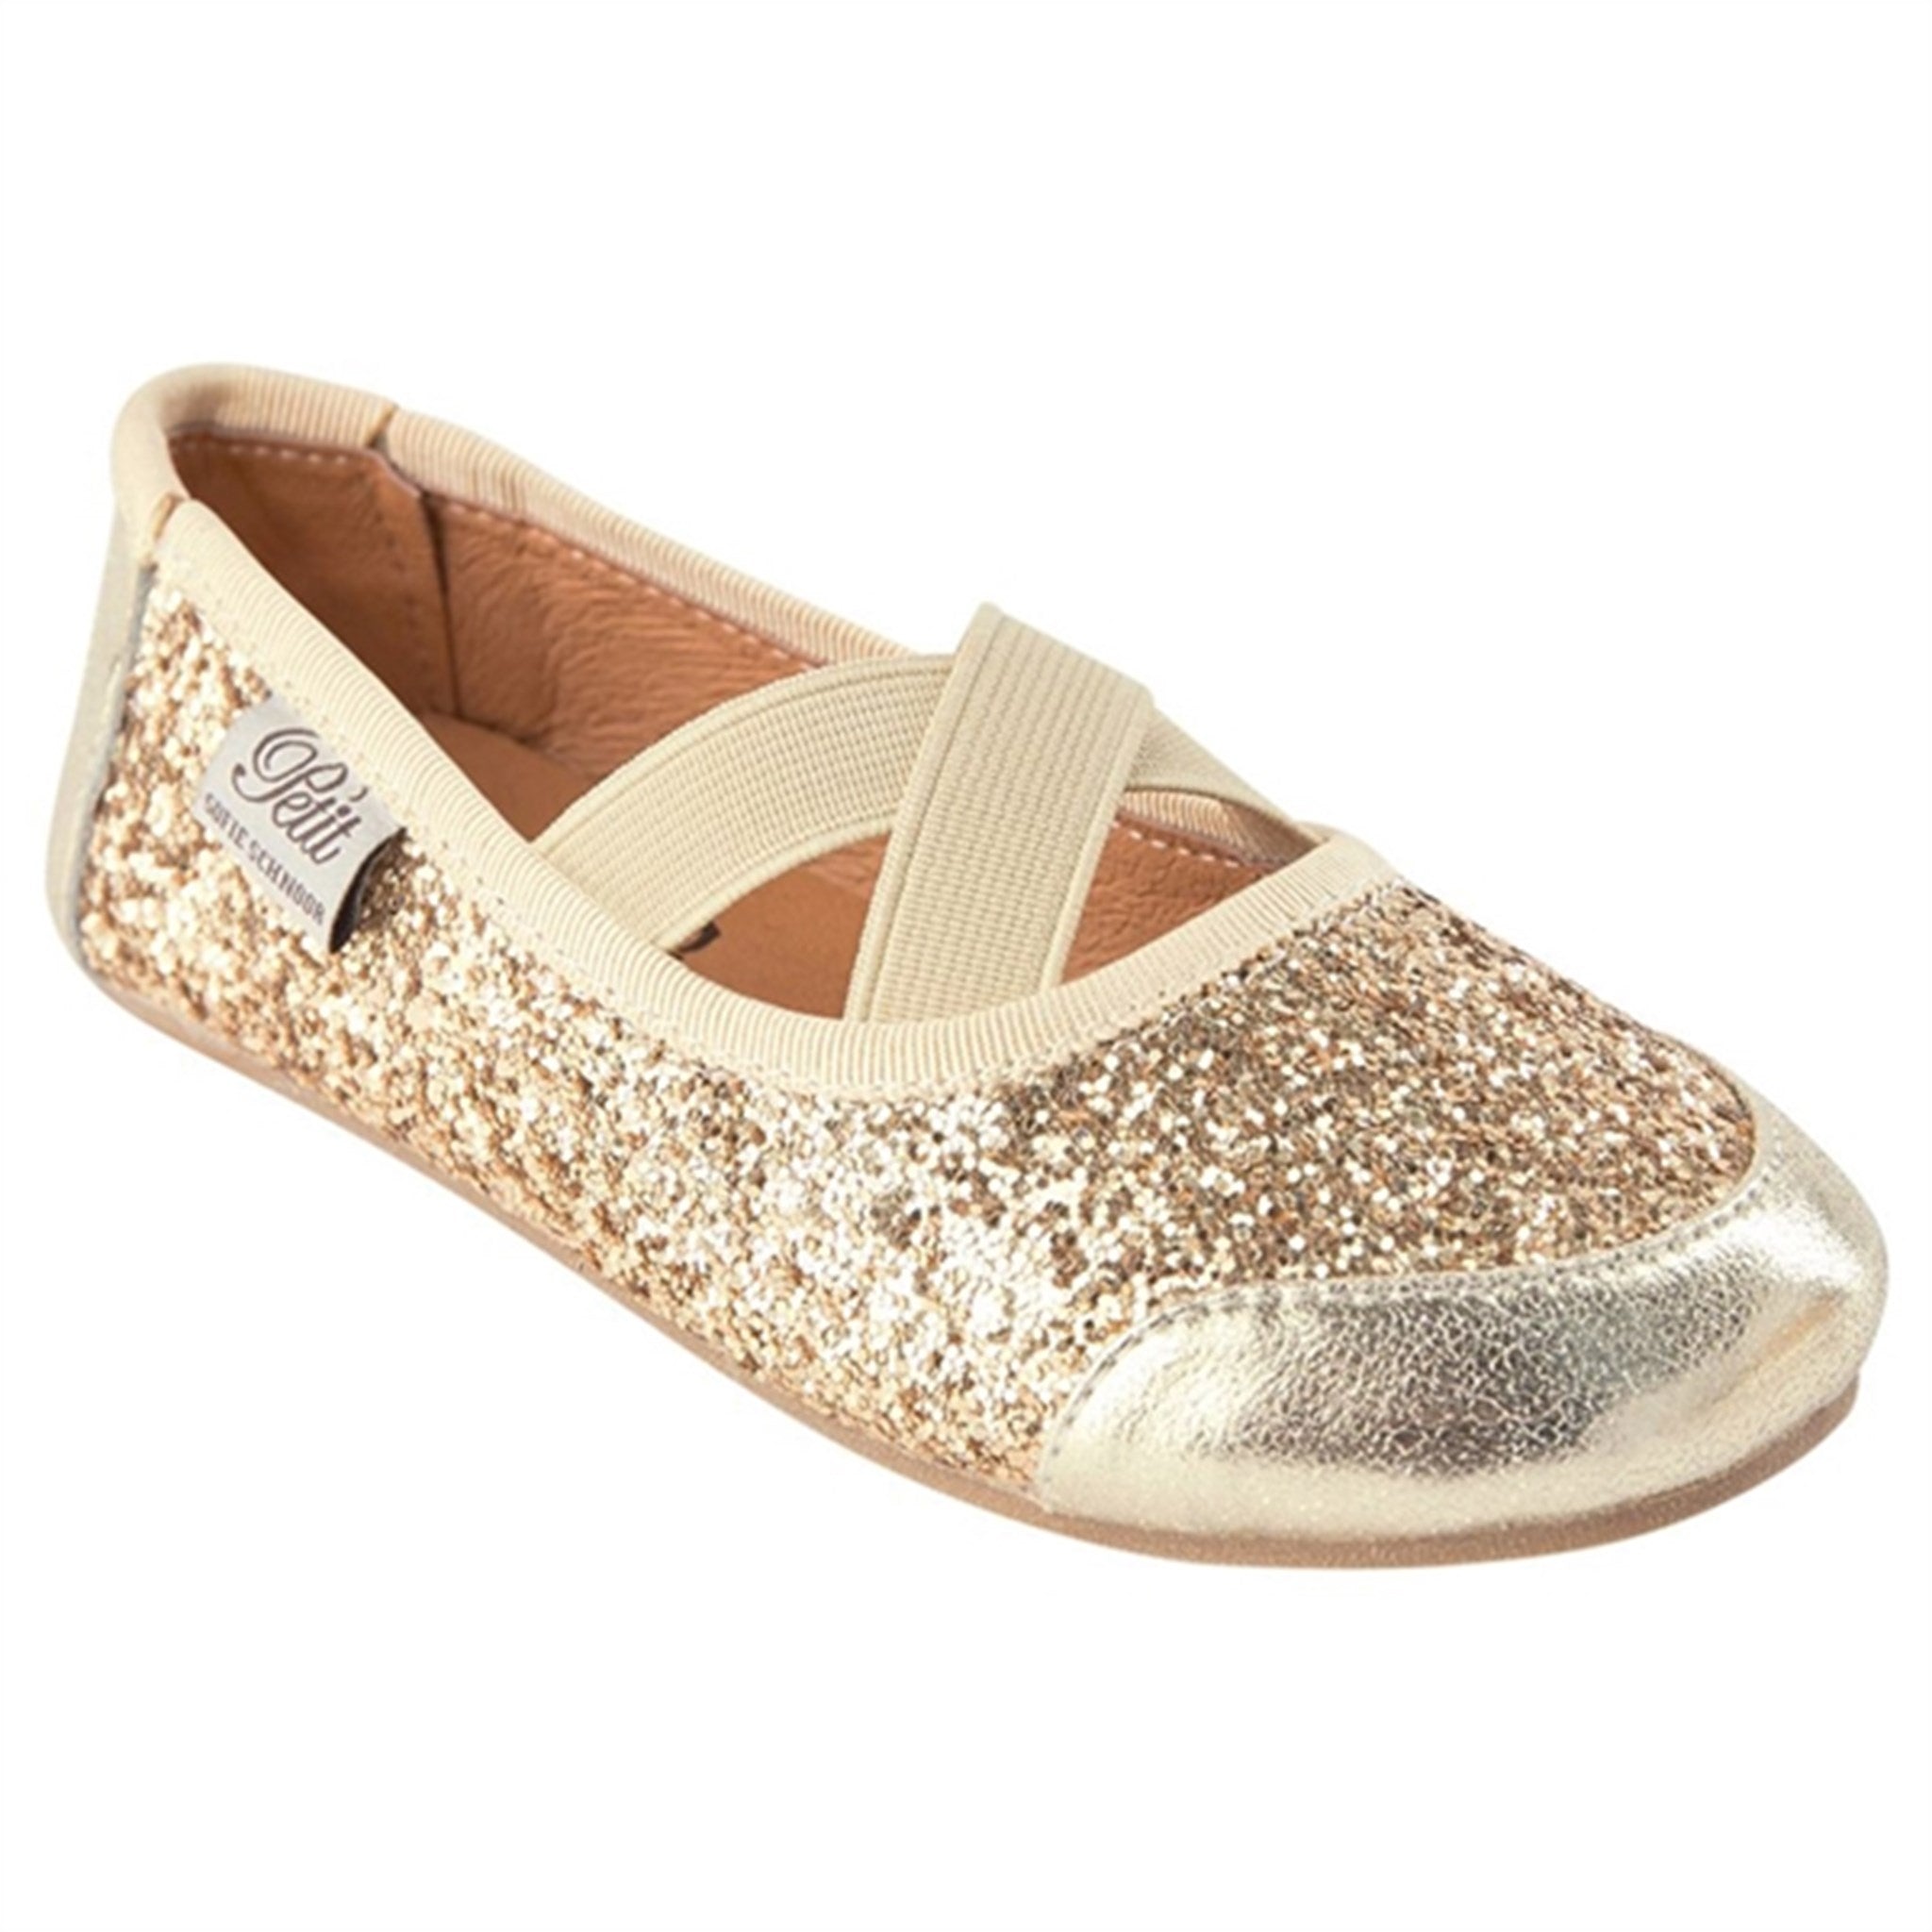 Petit by Sofie Schnoor Ballerina Indoors Shoes Champagne